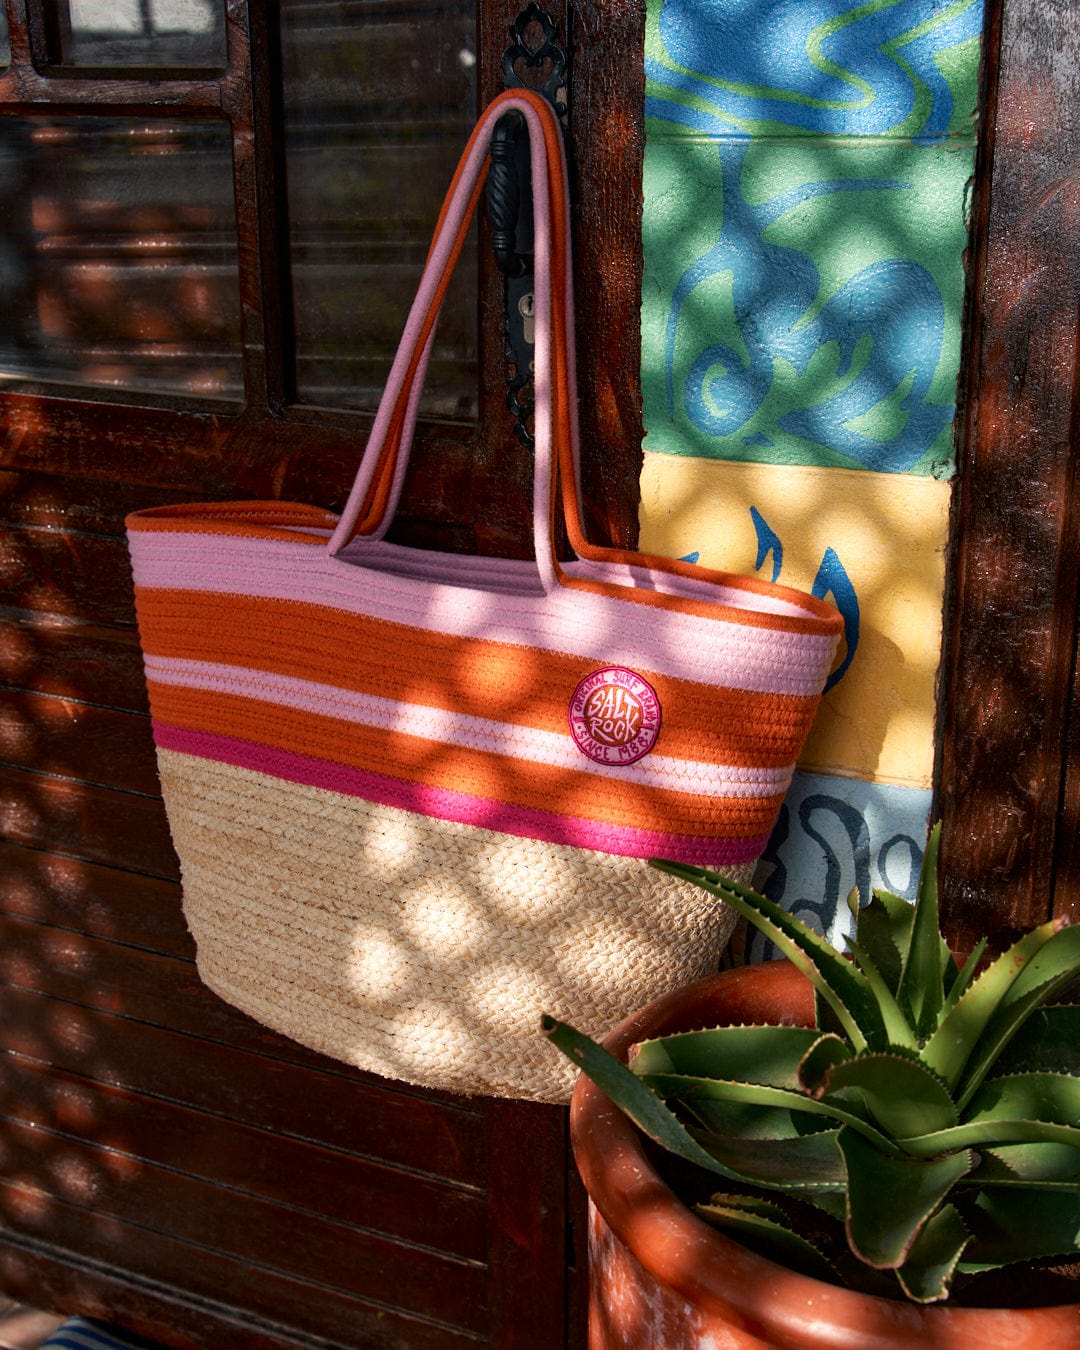 Colorful retro Las Cora Straw Beach Bag - Cream hanging on a wooden door next to a succulent plant and a brightly patterned cloth.